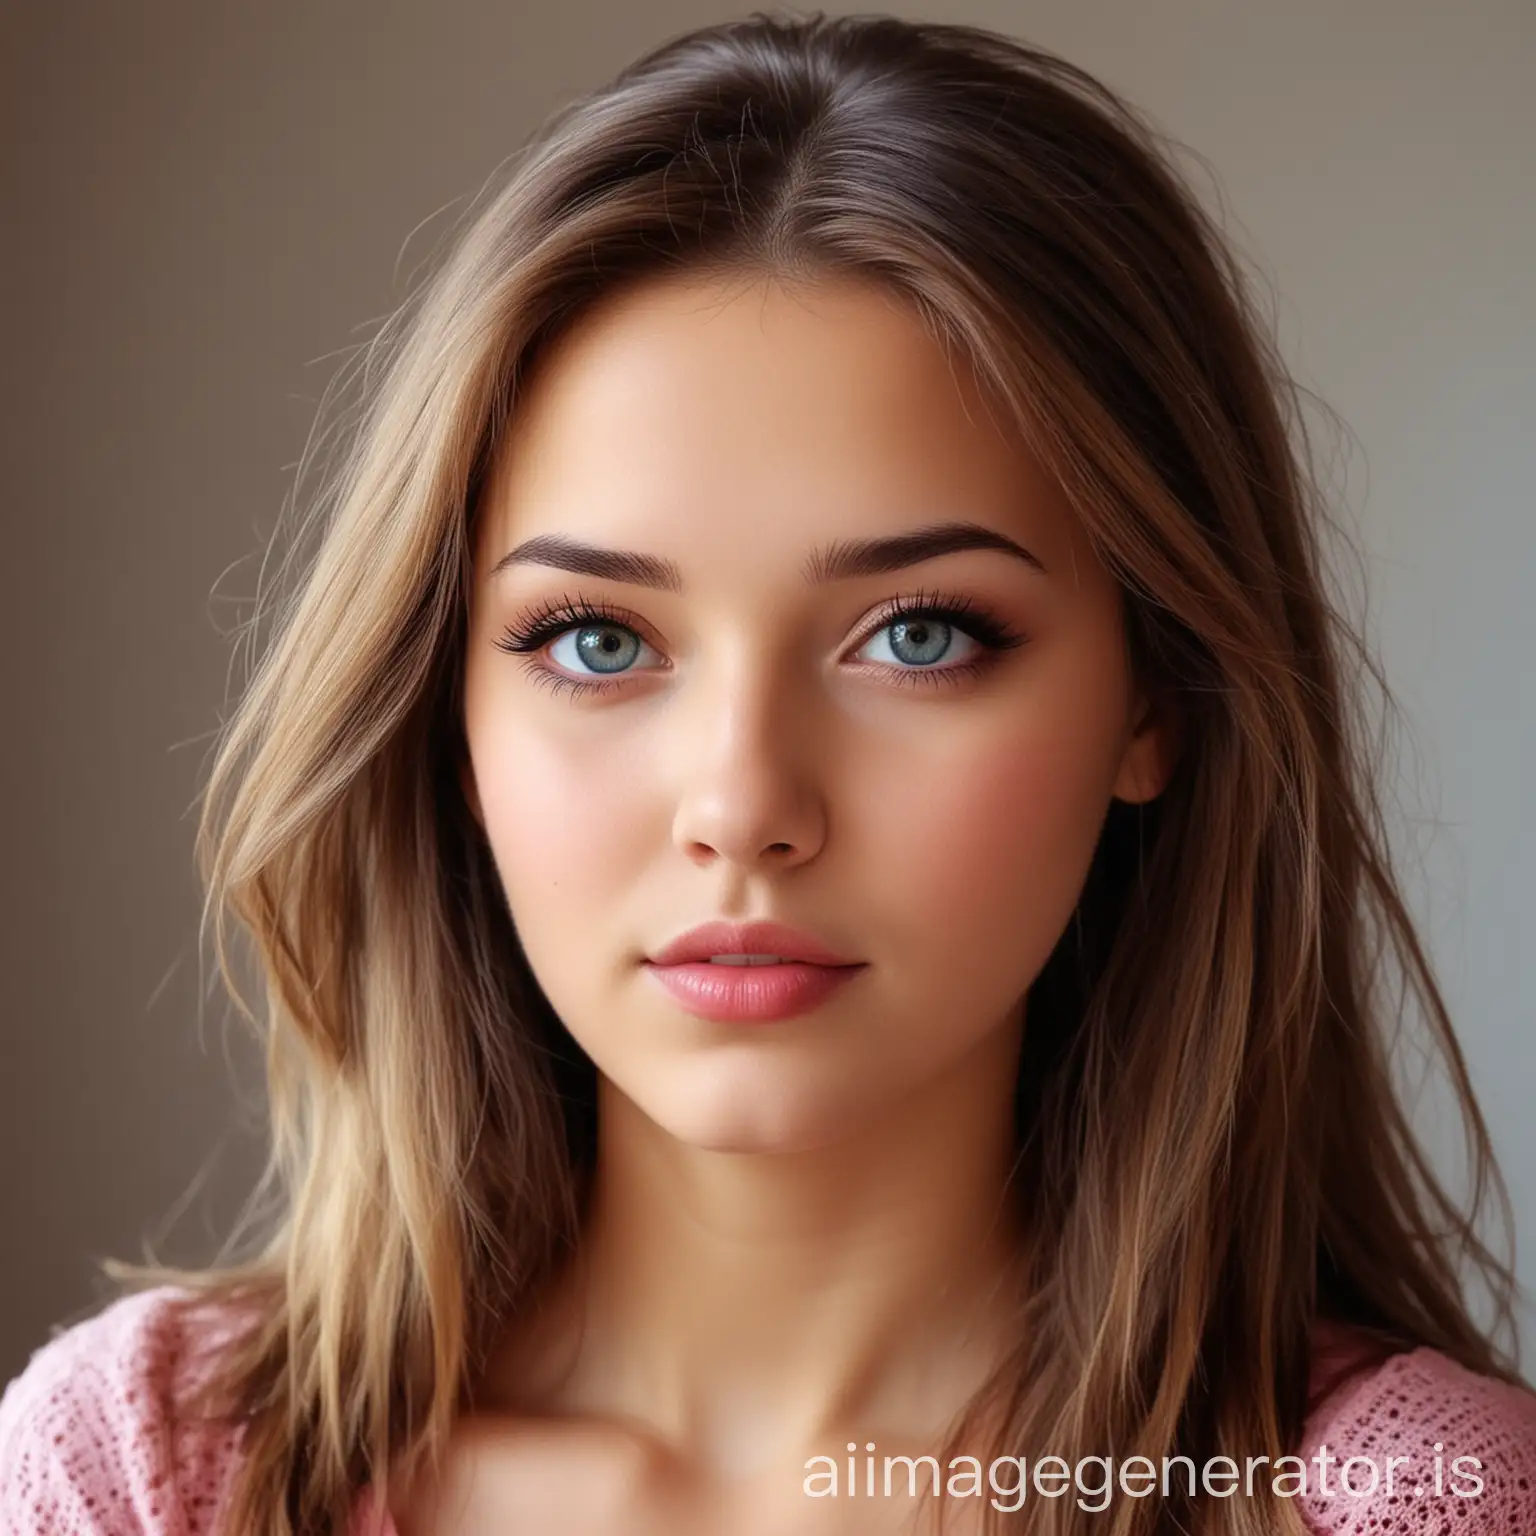 Radiant-Beauty-A-Stunning-Portrait-of-a-Young-Woman